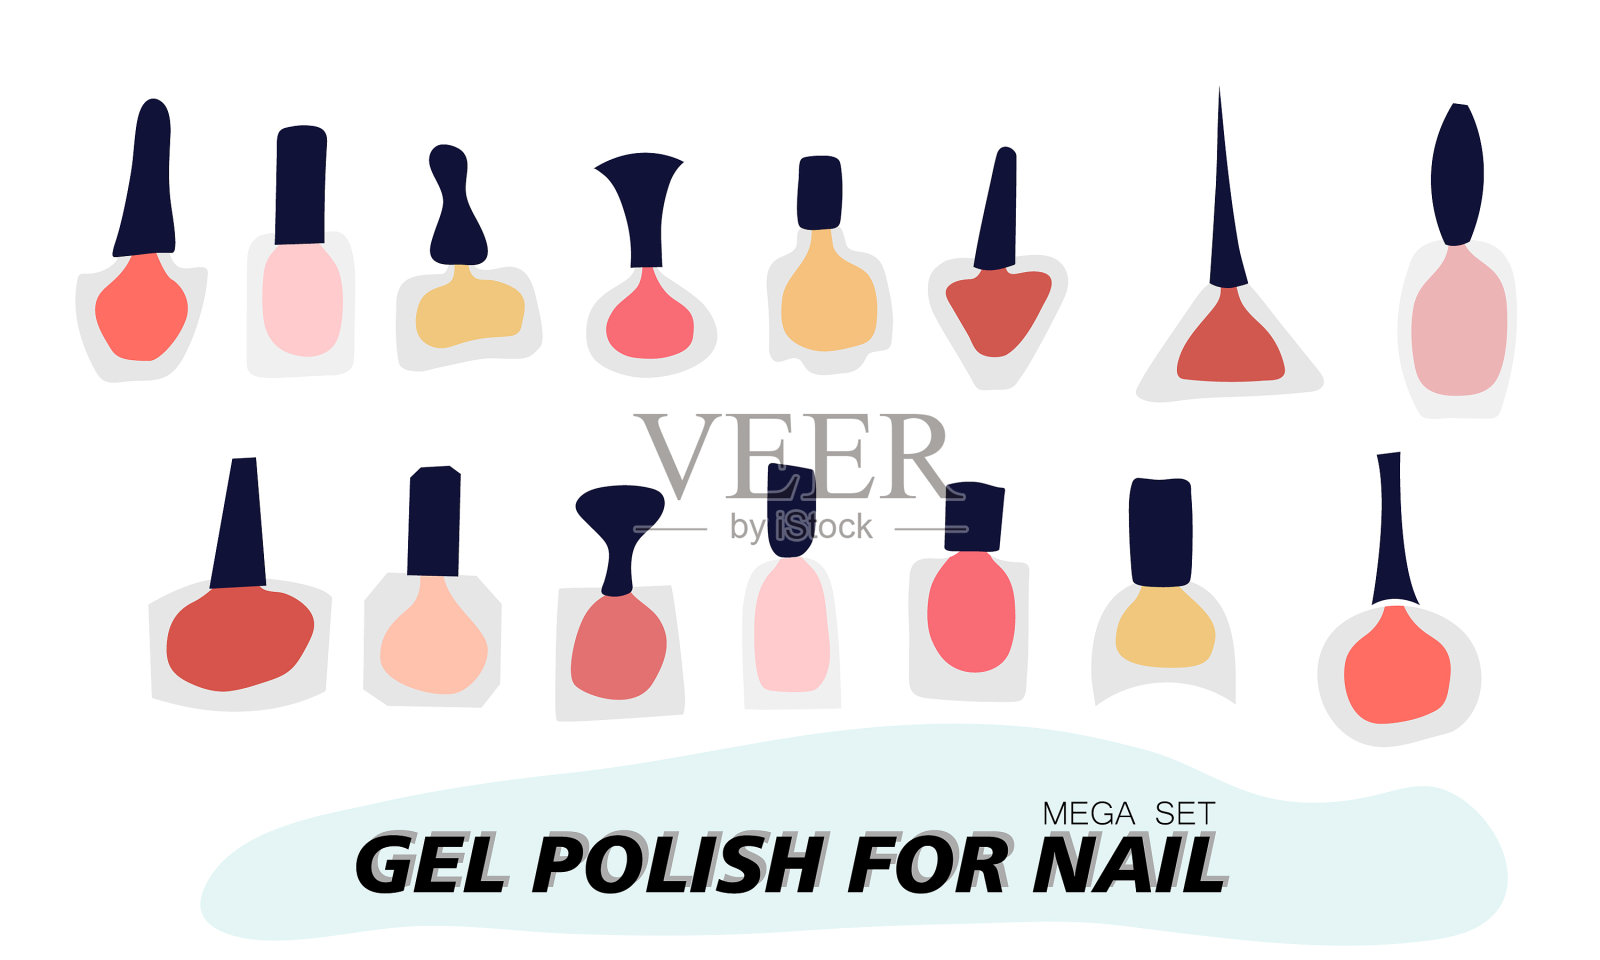 Manicure Png Icon All images and logos are crafted with great workmanship